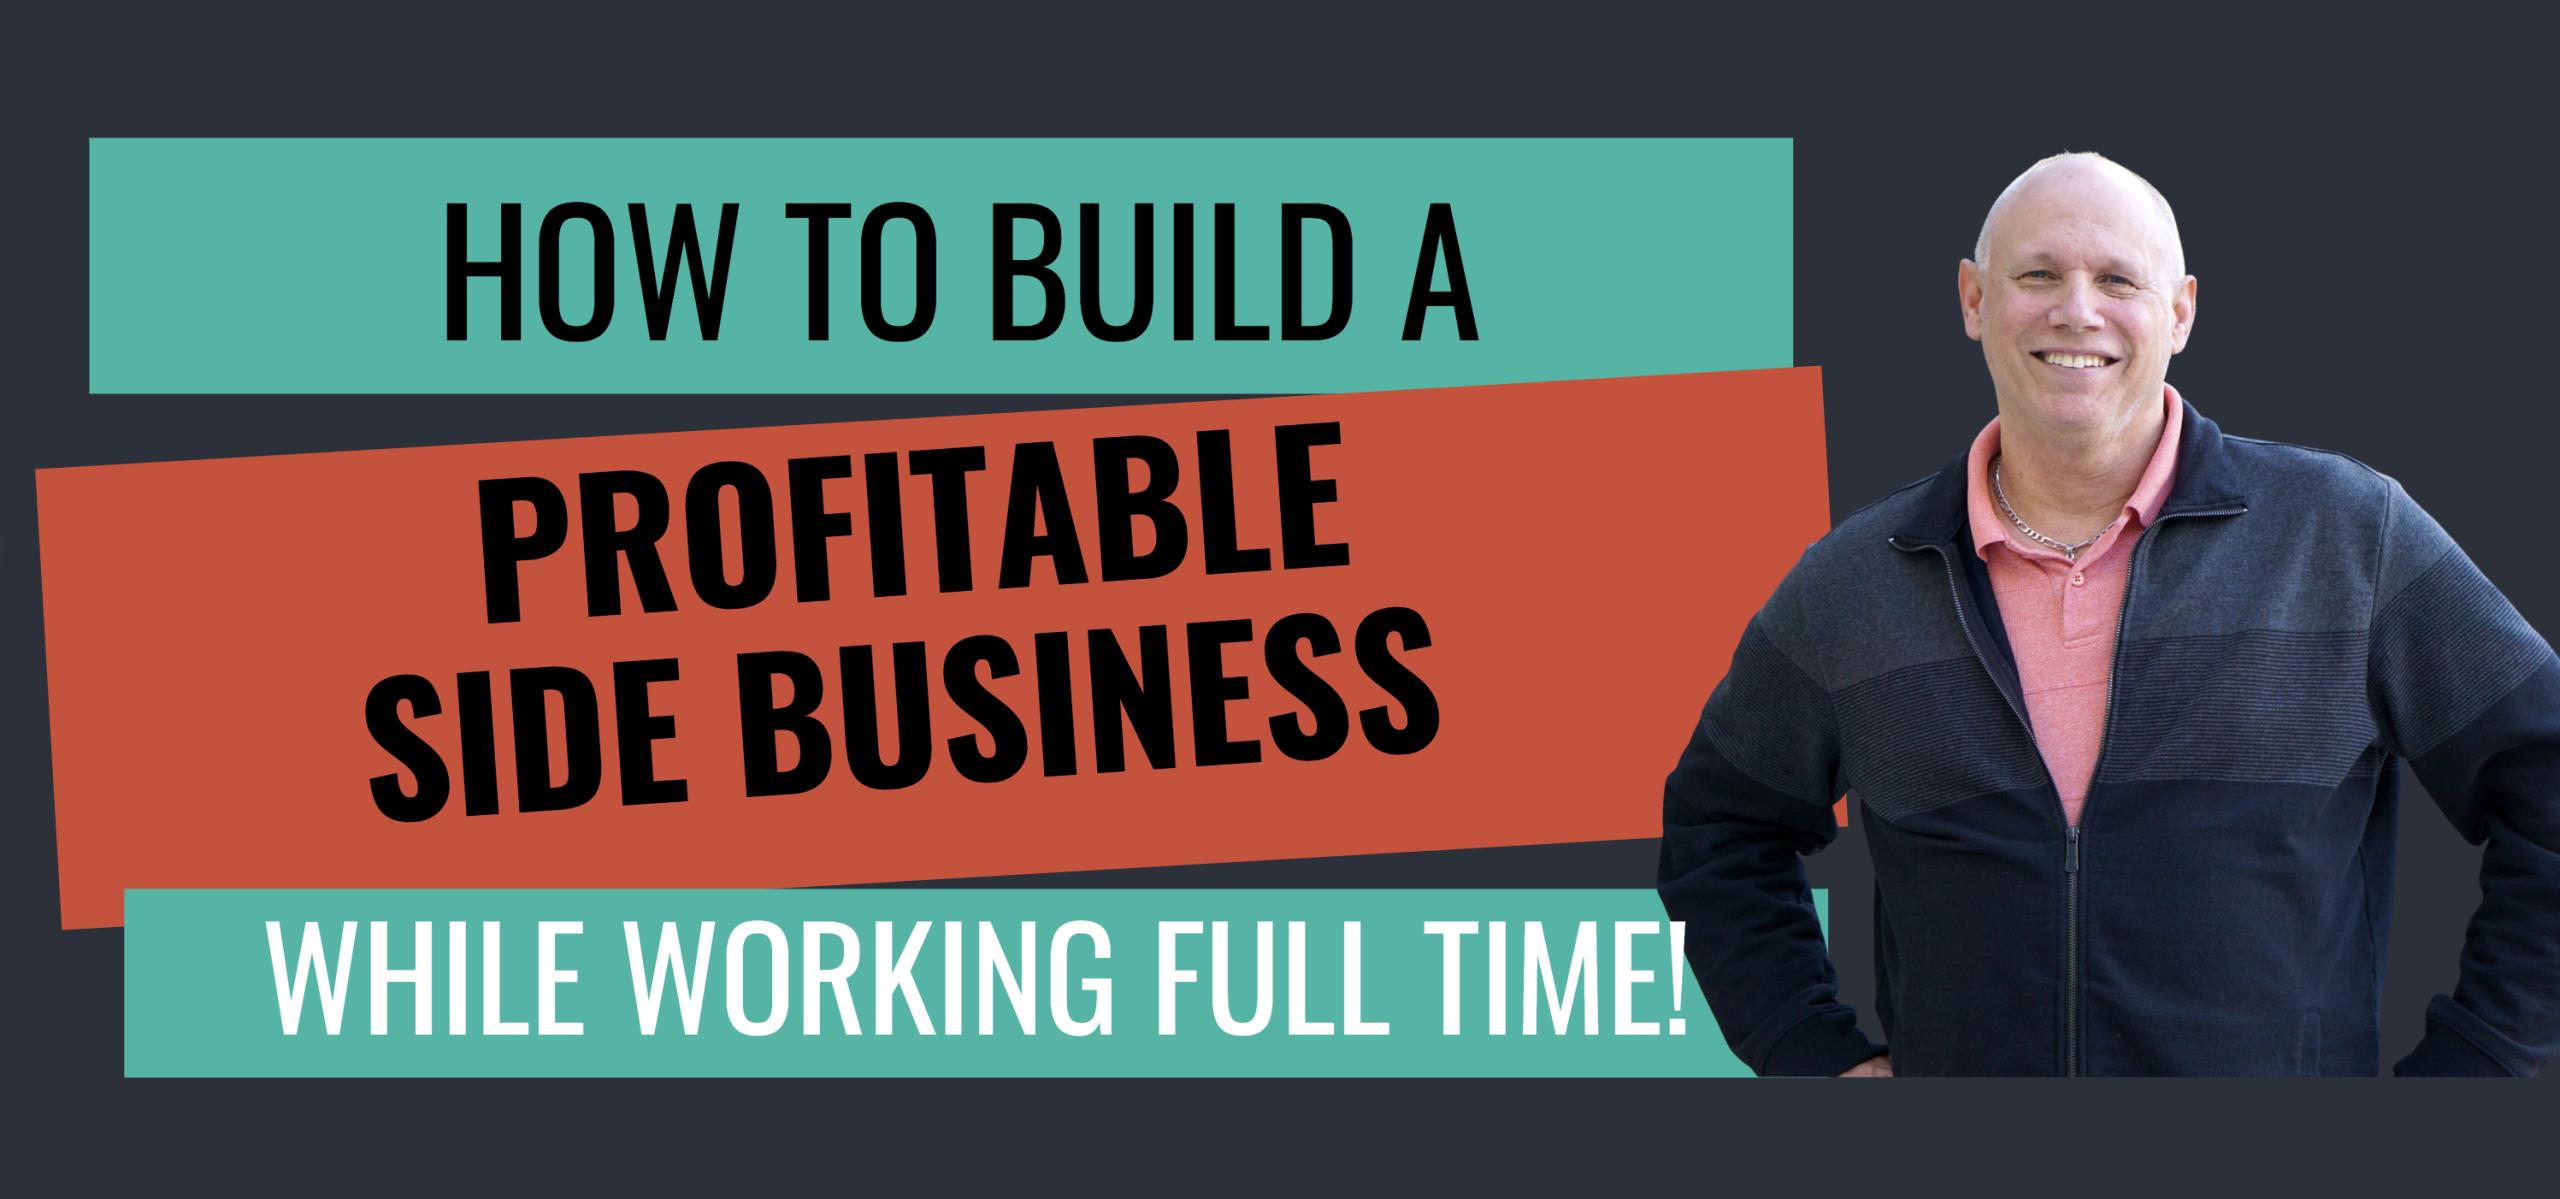 How To Build A Profitable Side Business While Working Full Time